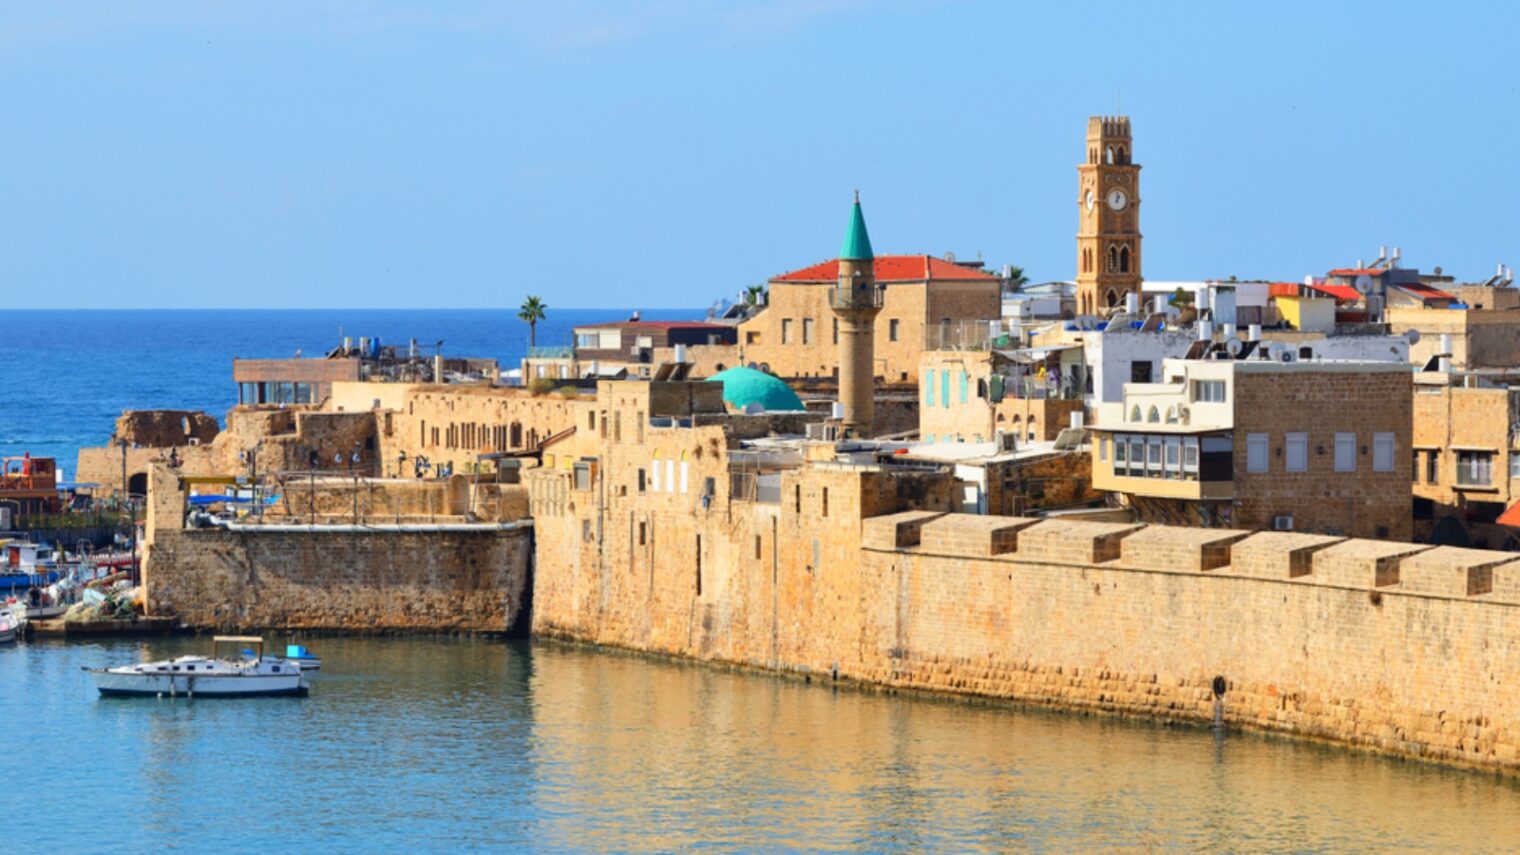 A view of Akkoâ€™s harbor, walls and houses of worship. Photo by Alex7370 via Shutterstock.com